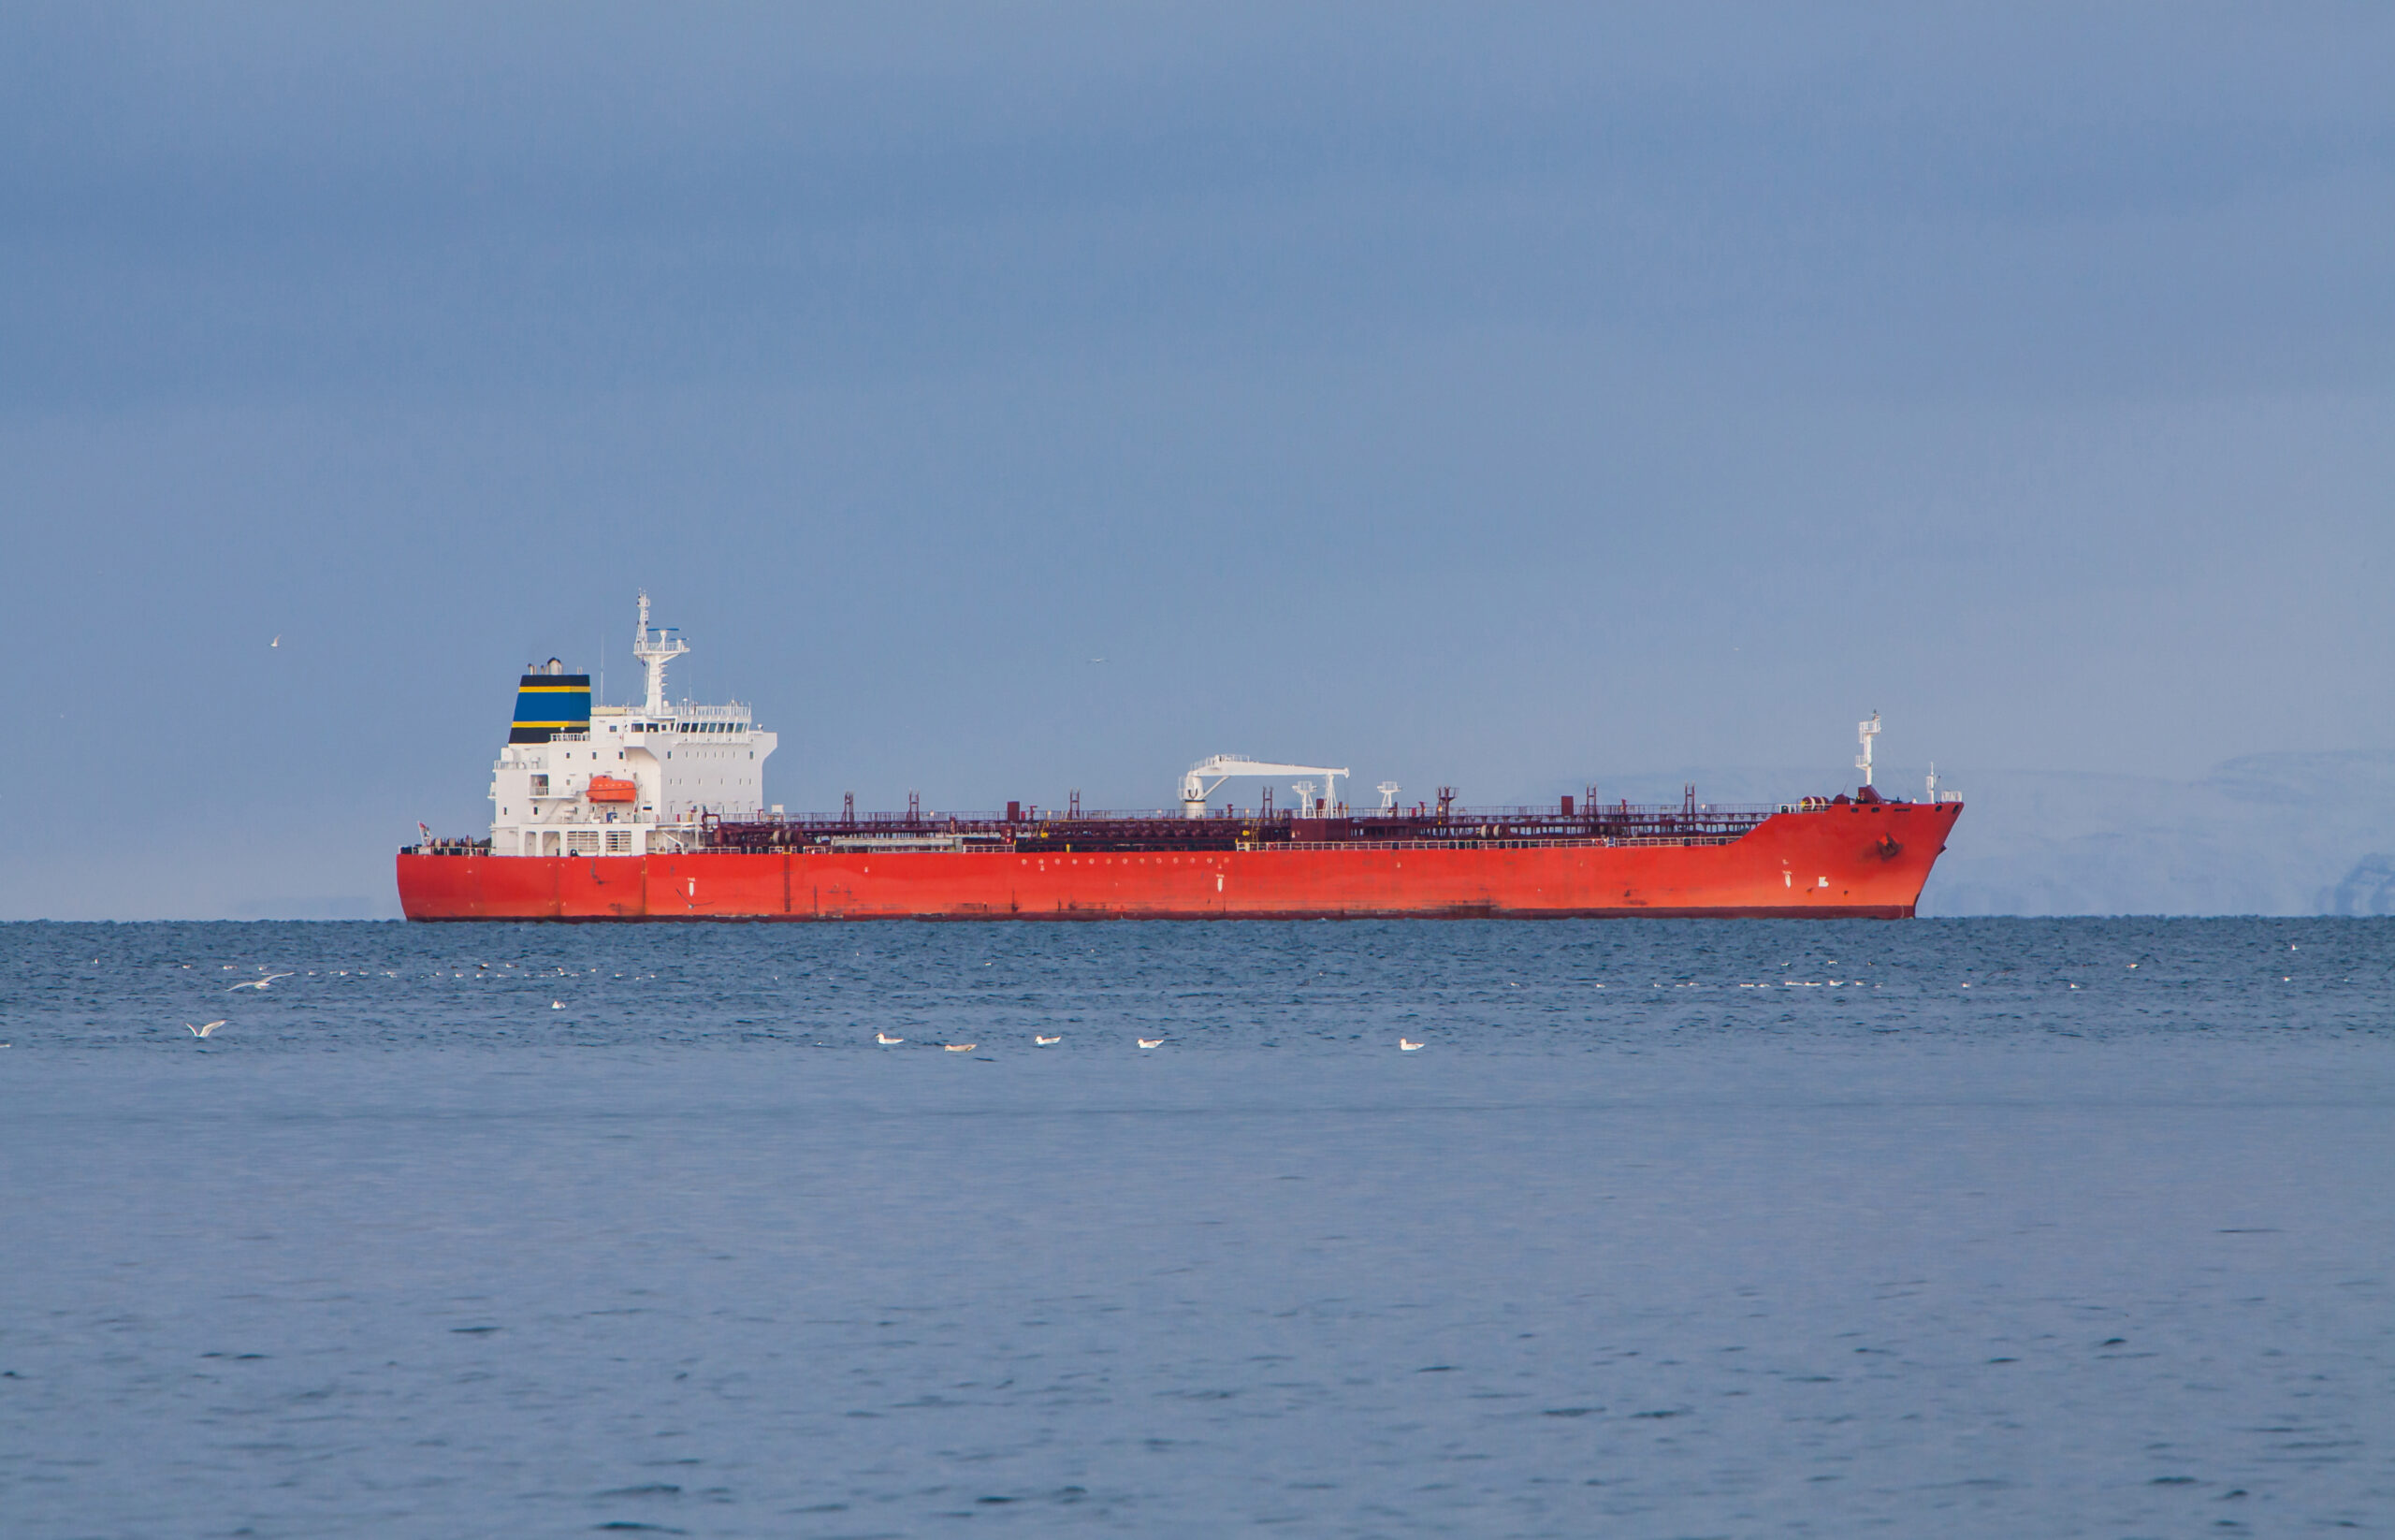 Red product tanker approaching port in Helguvik, Iceland.